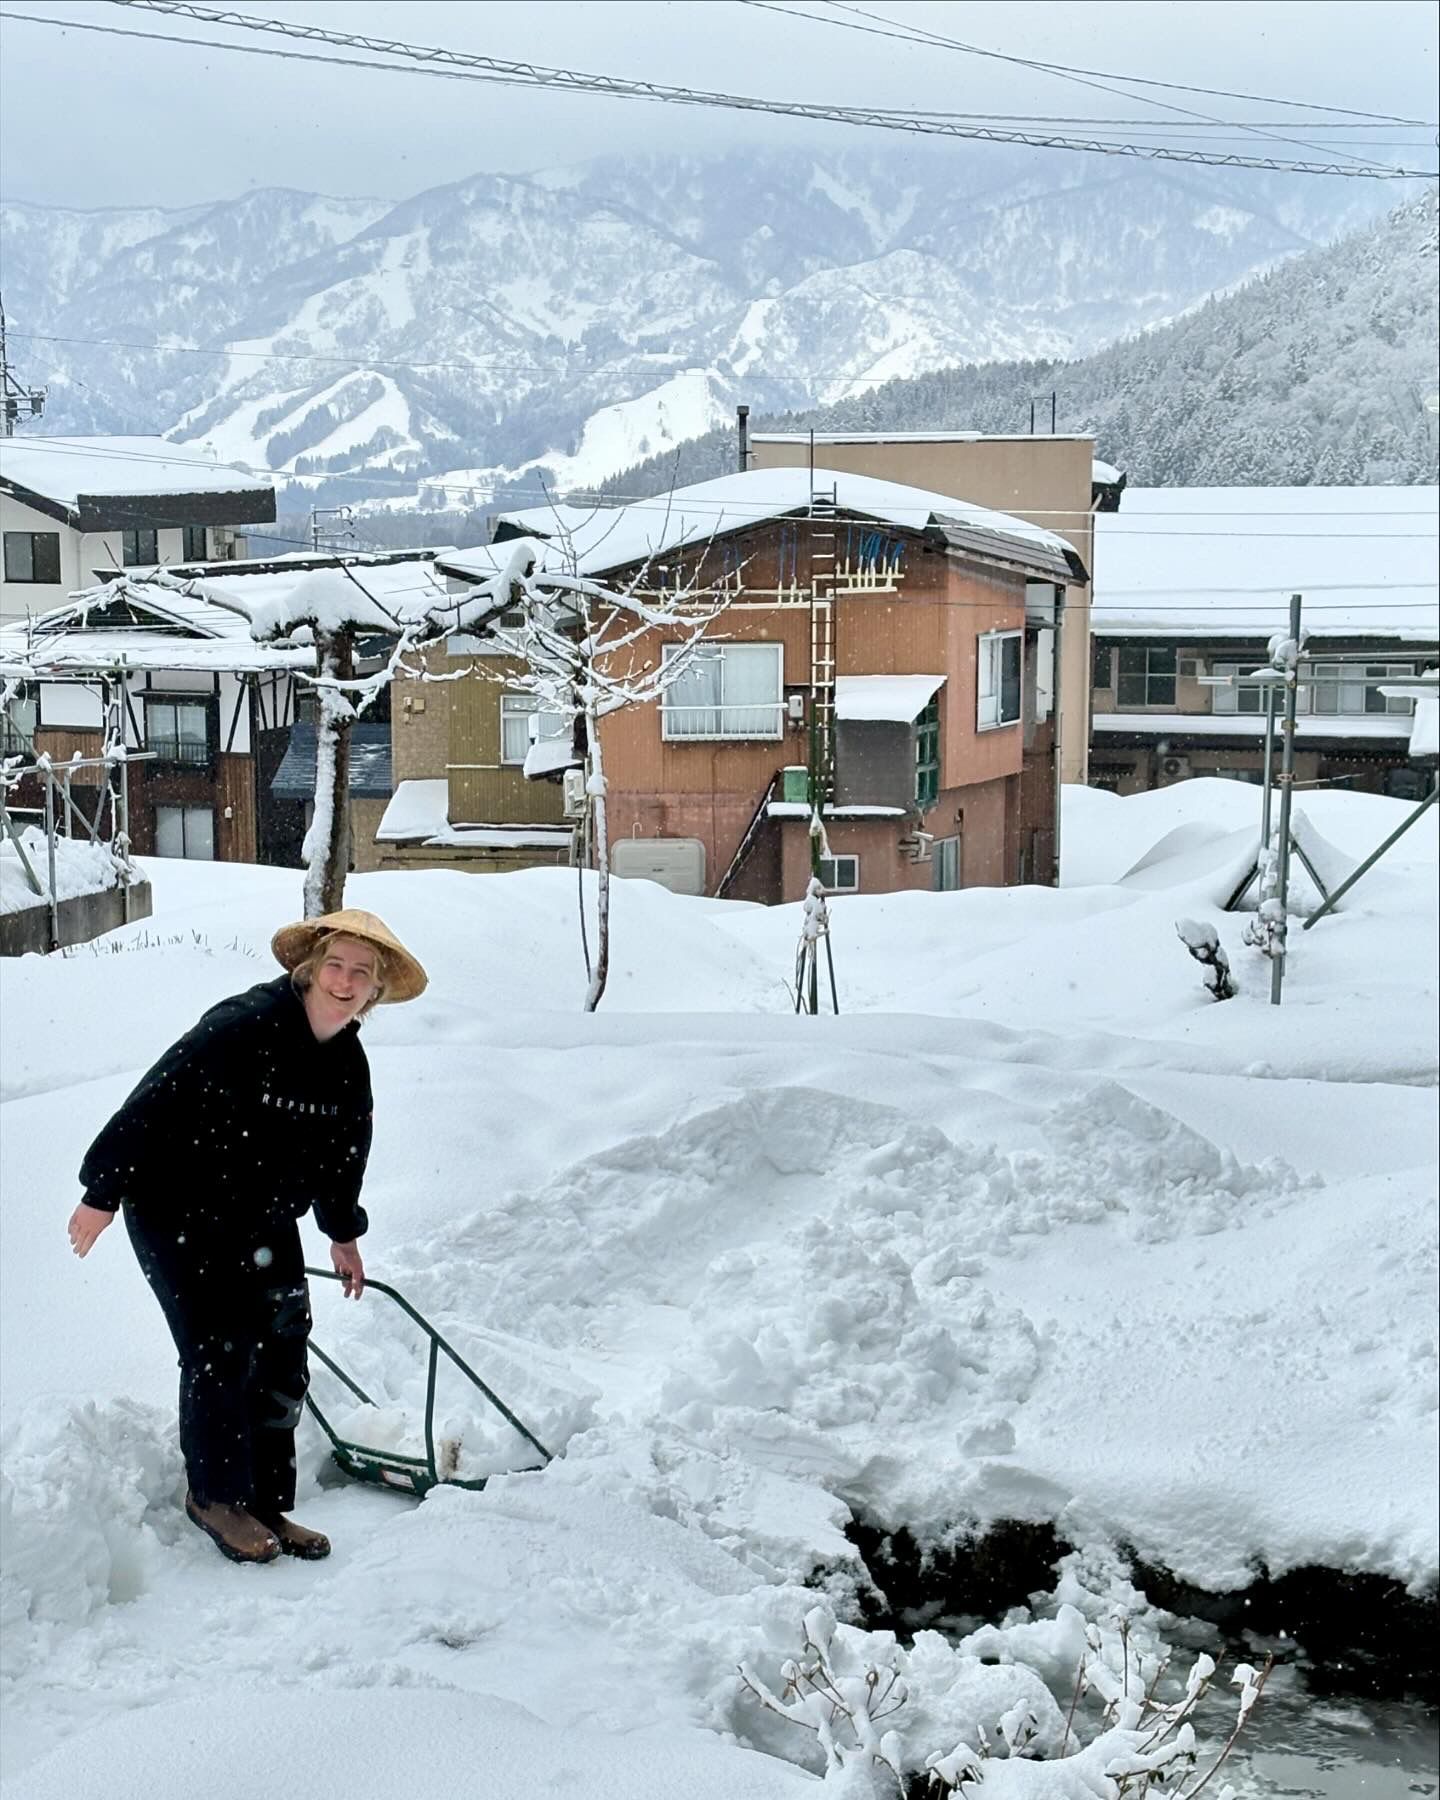 The staff of Nozawa Onsen taking care of the snow outside of the lodge